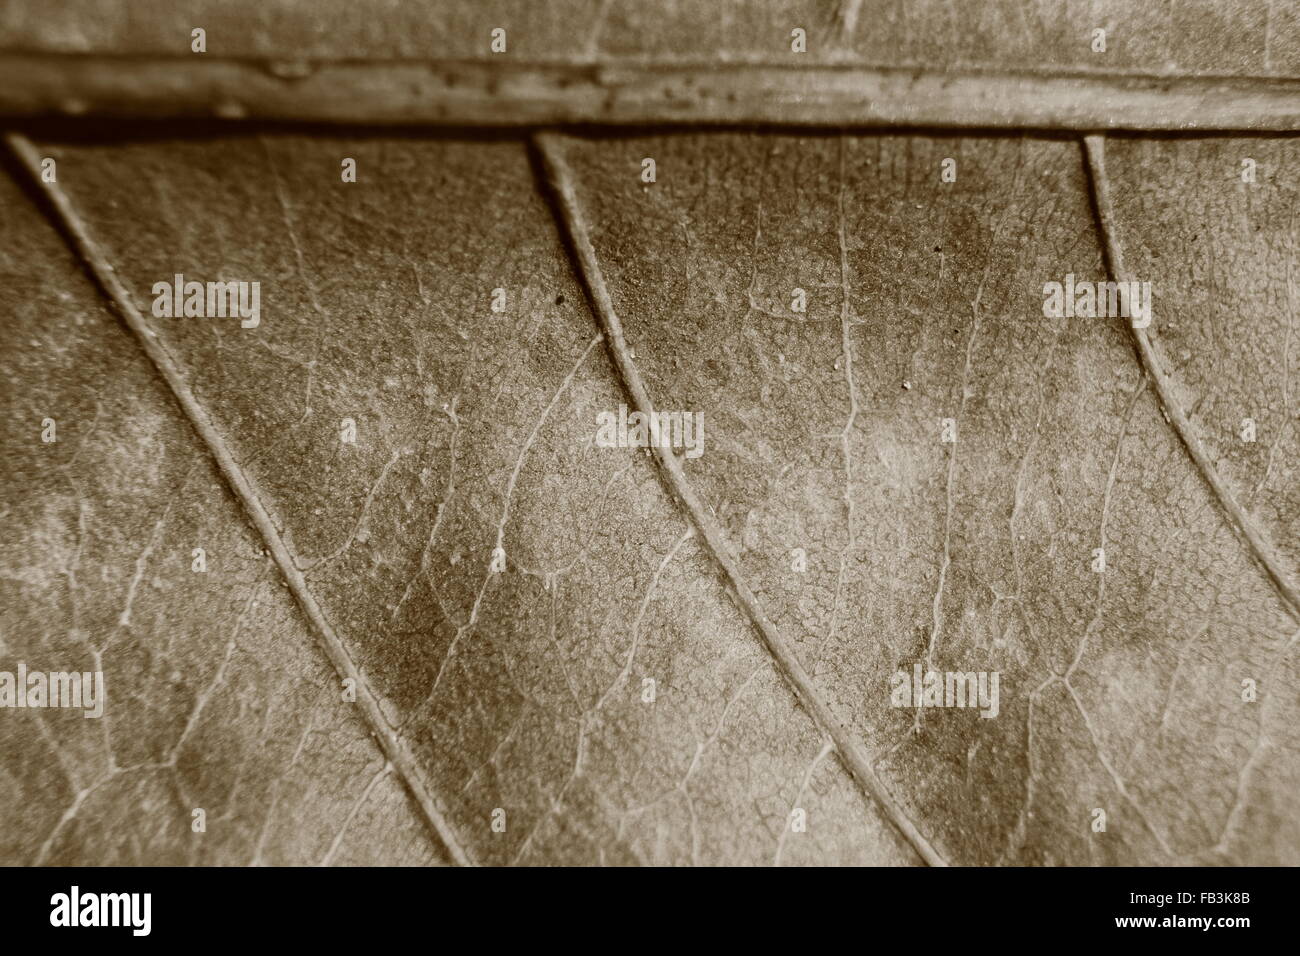 sepia tone blurry macro background of dry leaf, focus on center of the image, close-up to leaf vein. Stock Photo